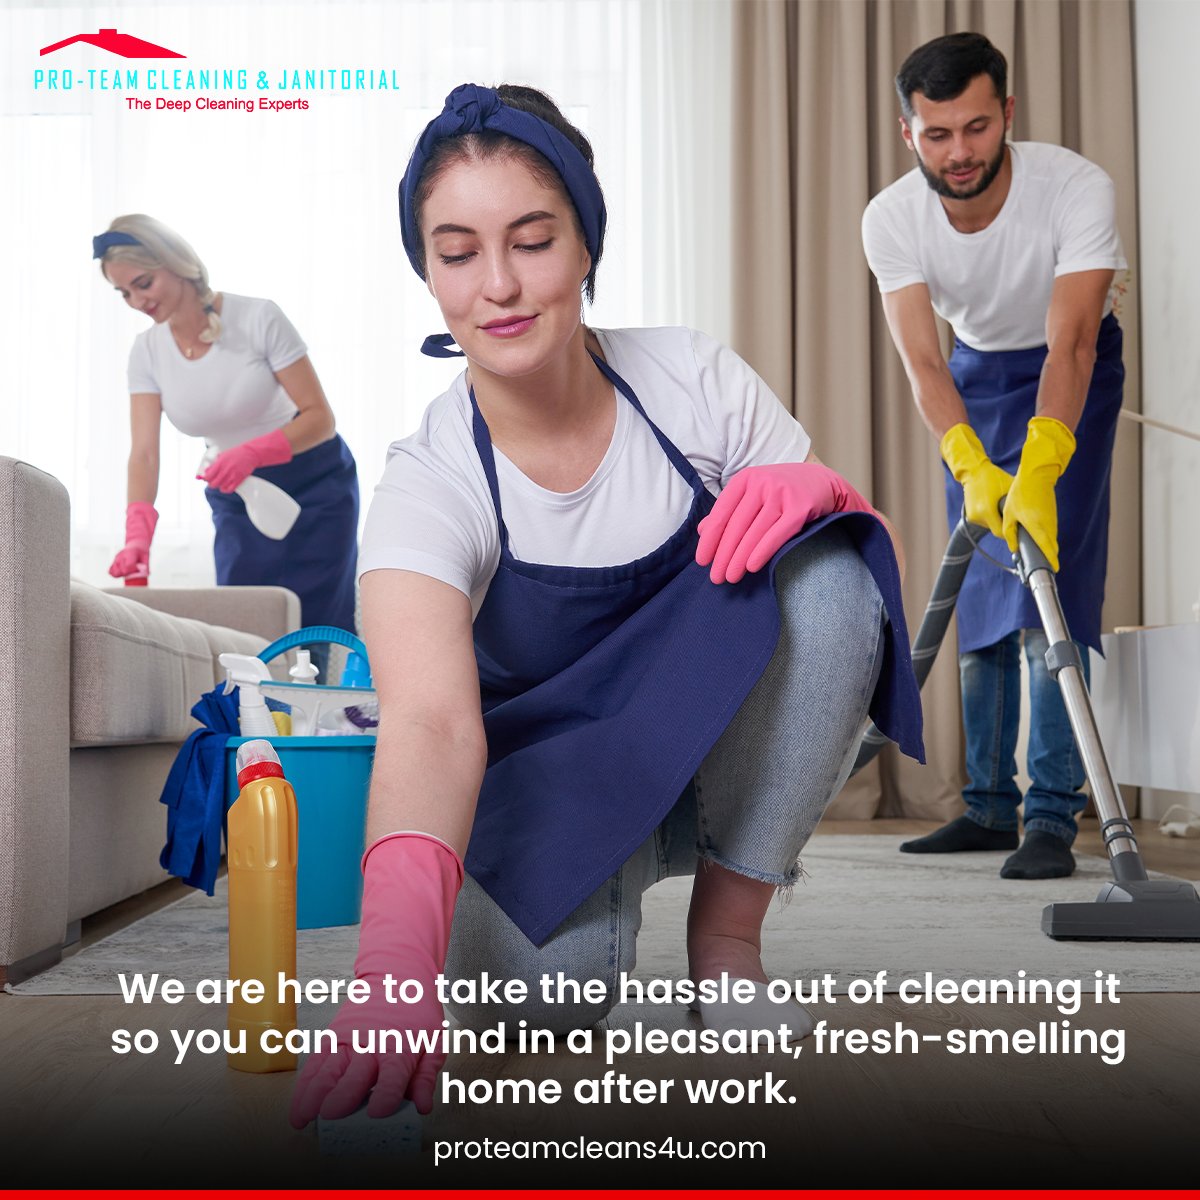 Pro-team cleaning has a team of expert cleaners who will make your homes shine like never before; from emptying the trash cans to leaving your bathrooms sparkling clean, you can rest assured that when we go.

#cleaningservice #apartmentclean #cleaning #Bakersfield